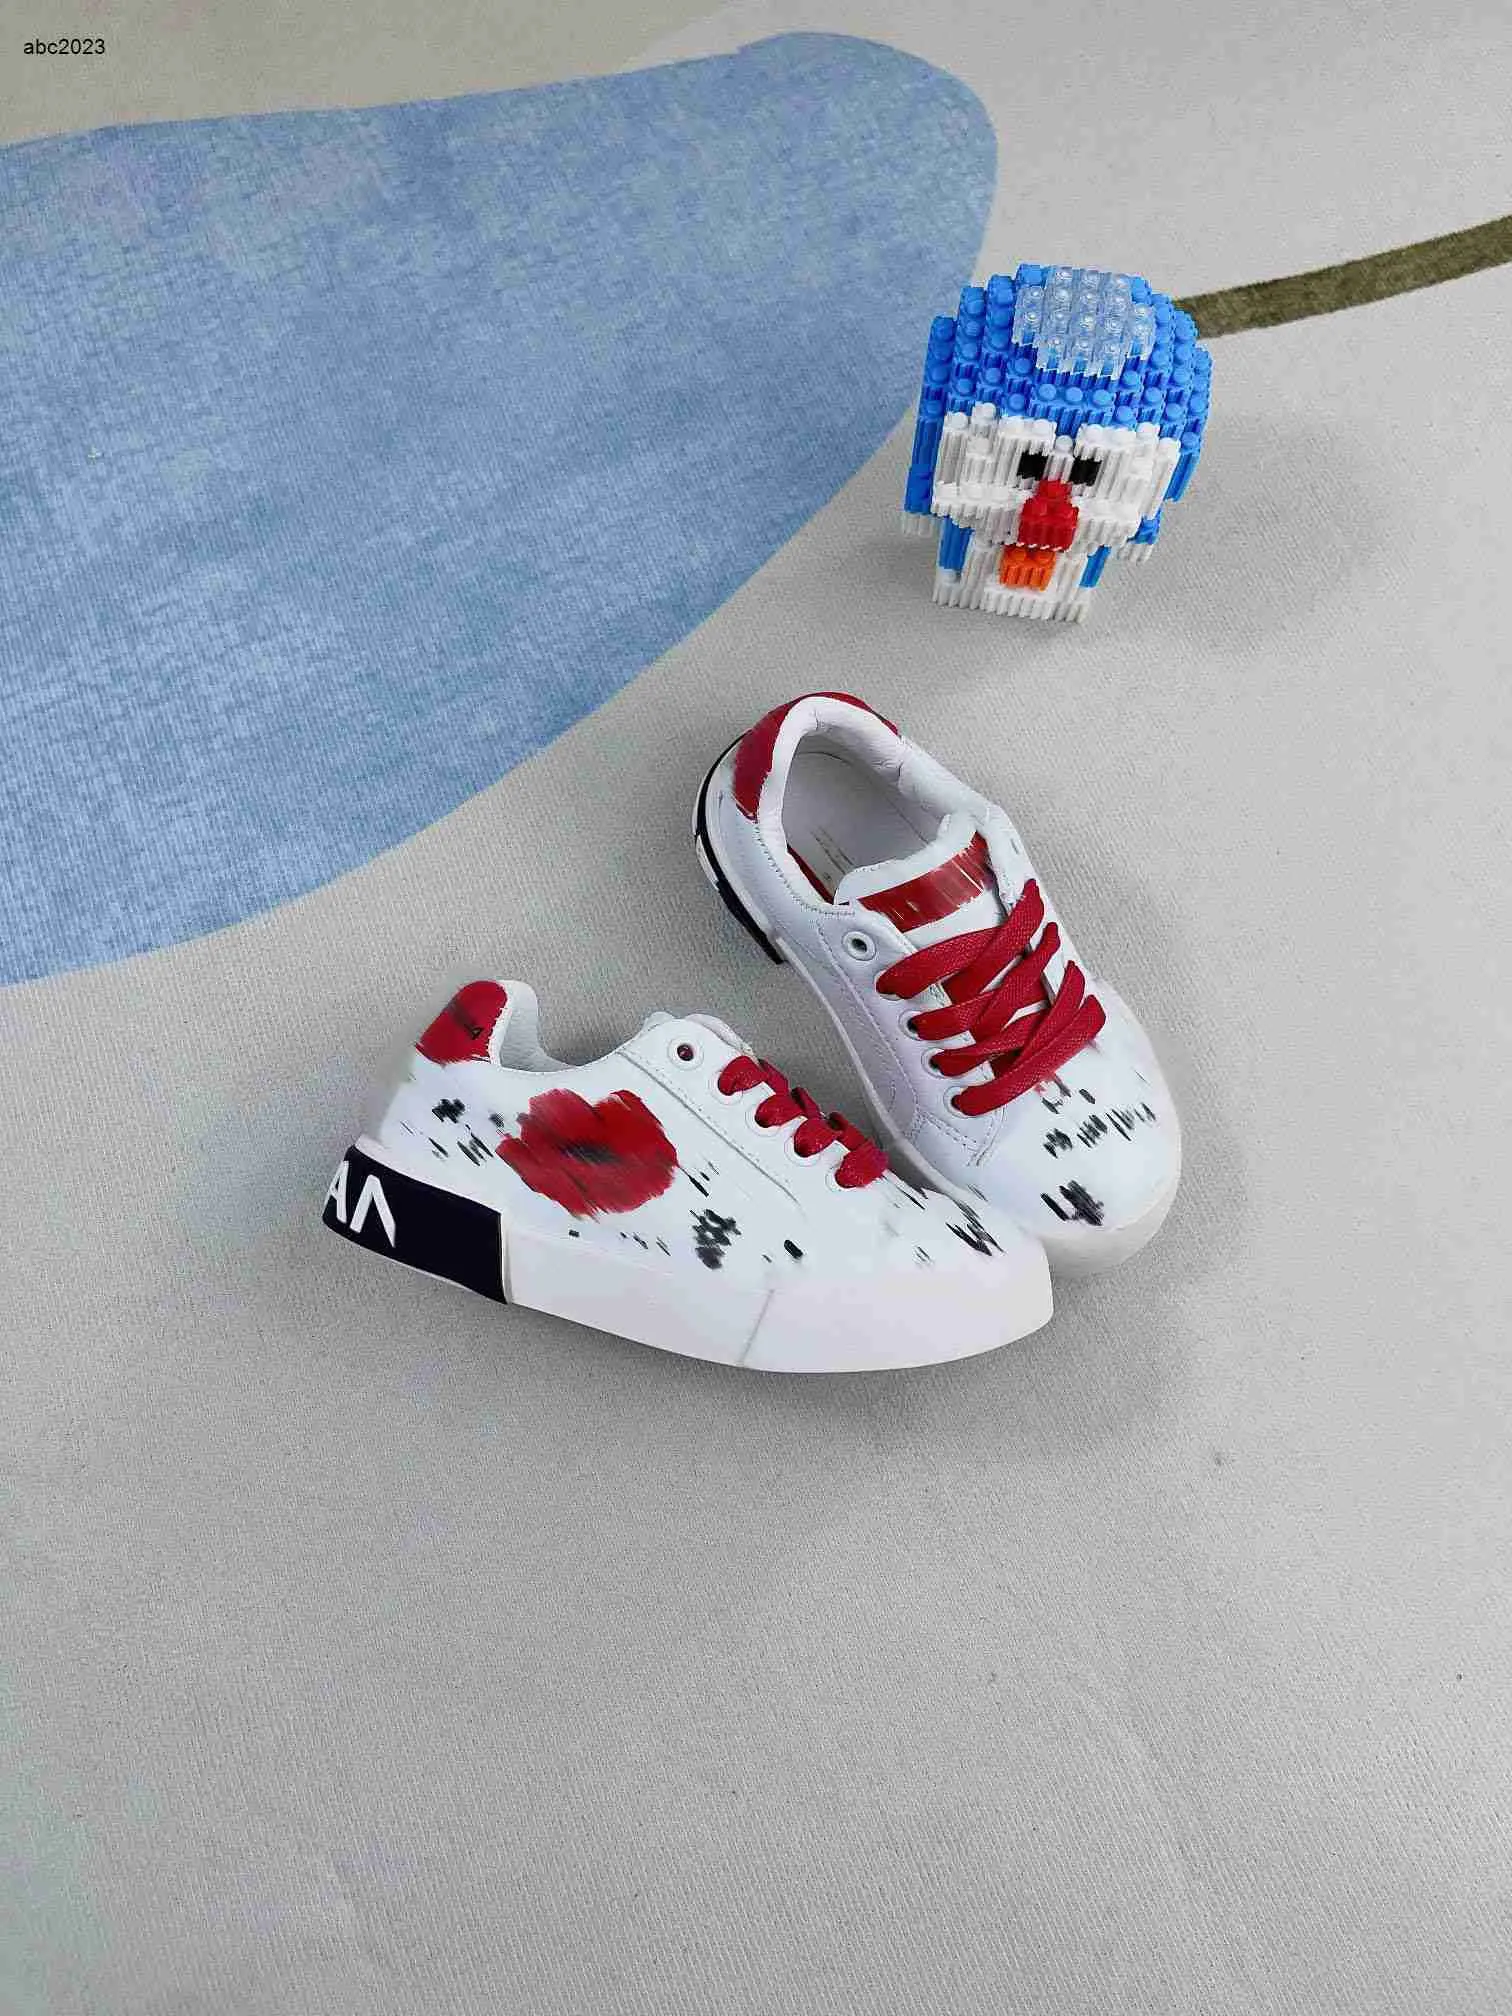 Classics Baby Sneakers Red Floral Print Kids Chaussures Taille 26-35 Boîte Protection Girls Casual Board Chaussures Boys Casual Chores 24 APRILL